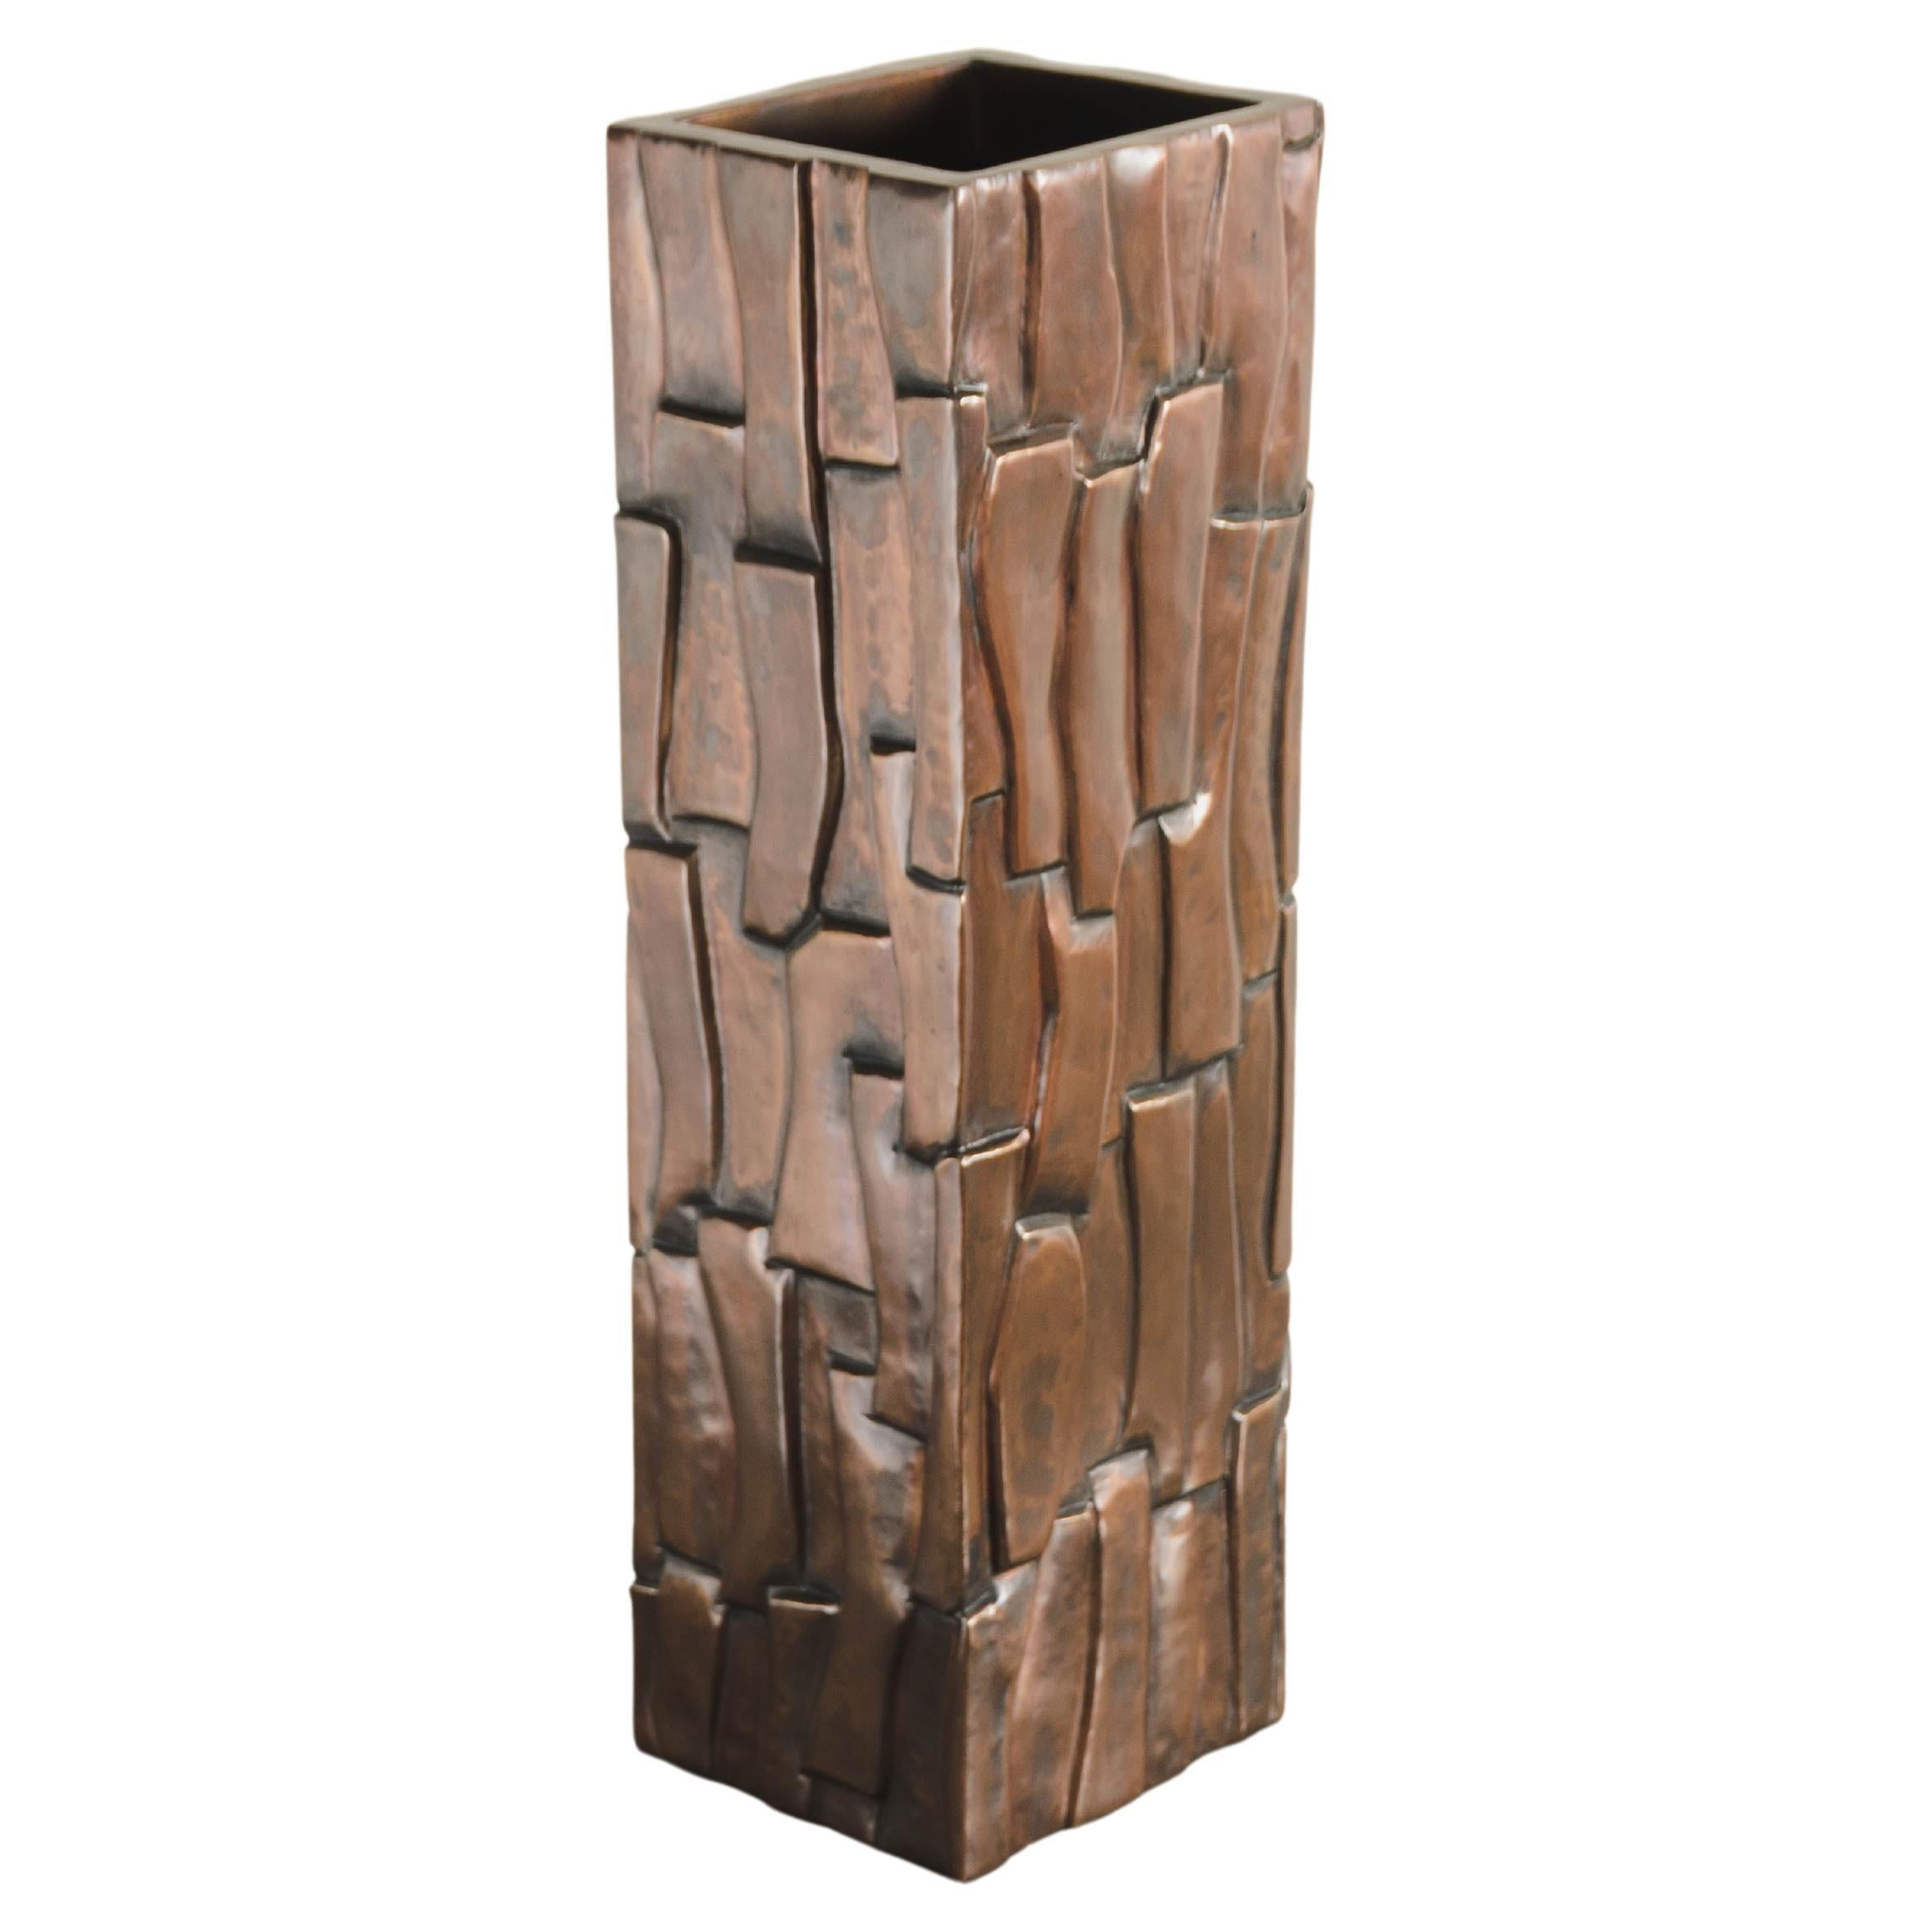 Contemporary Hand Repoussé Kuai Block Vase in Antique Copper by Robert Kuo For Sale